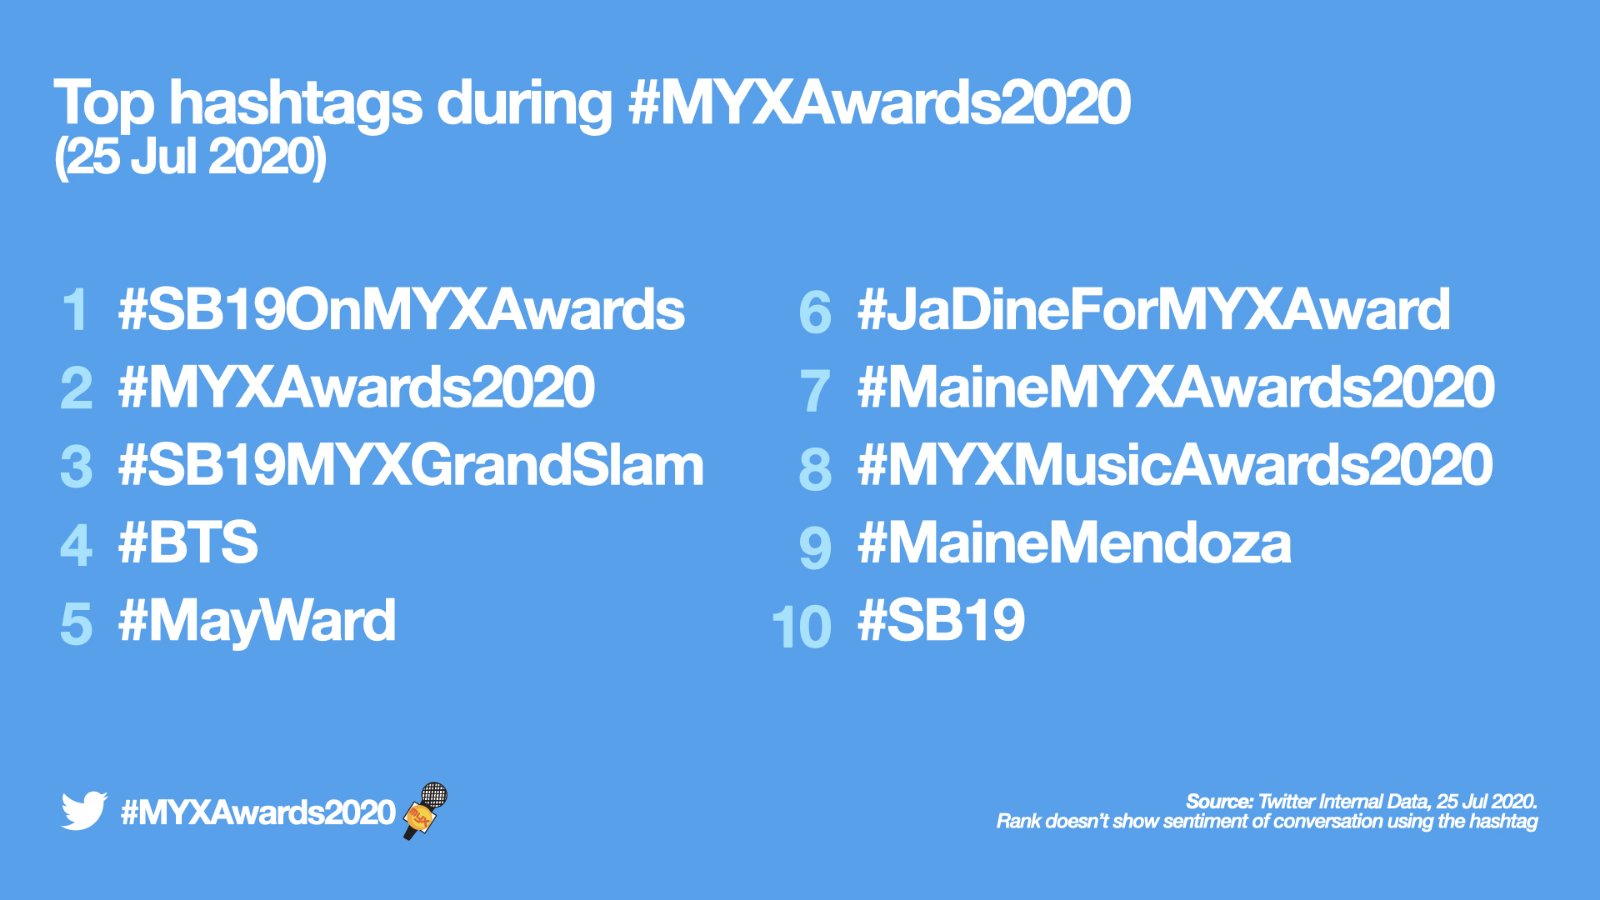 MYX Awards 2020 top hashtags on Twitter